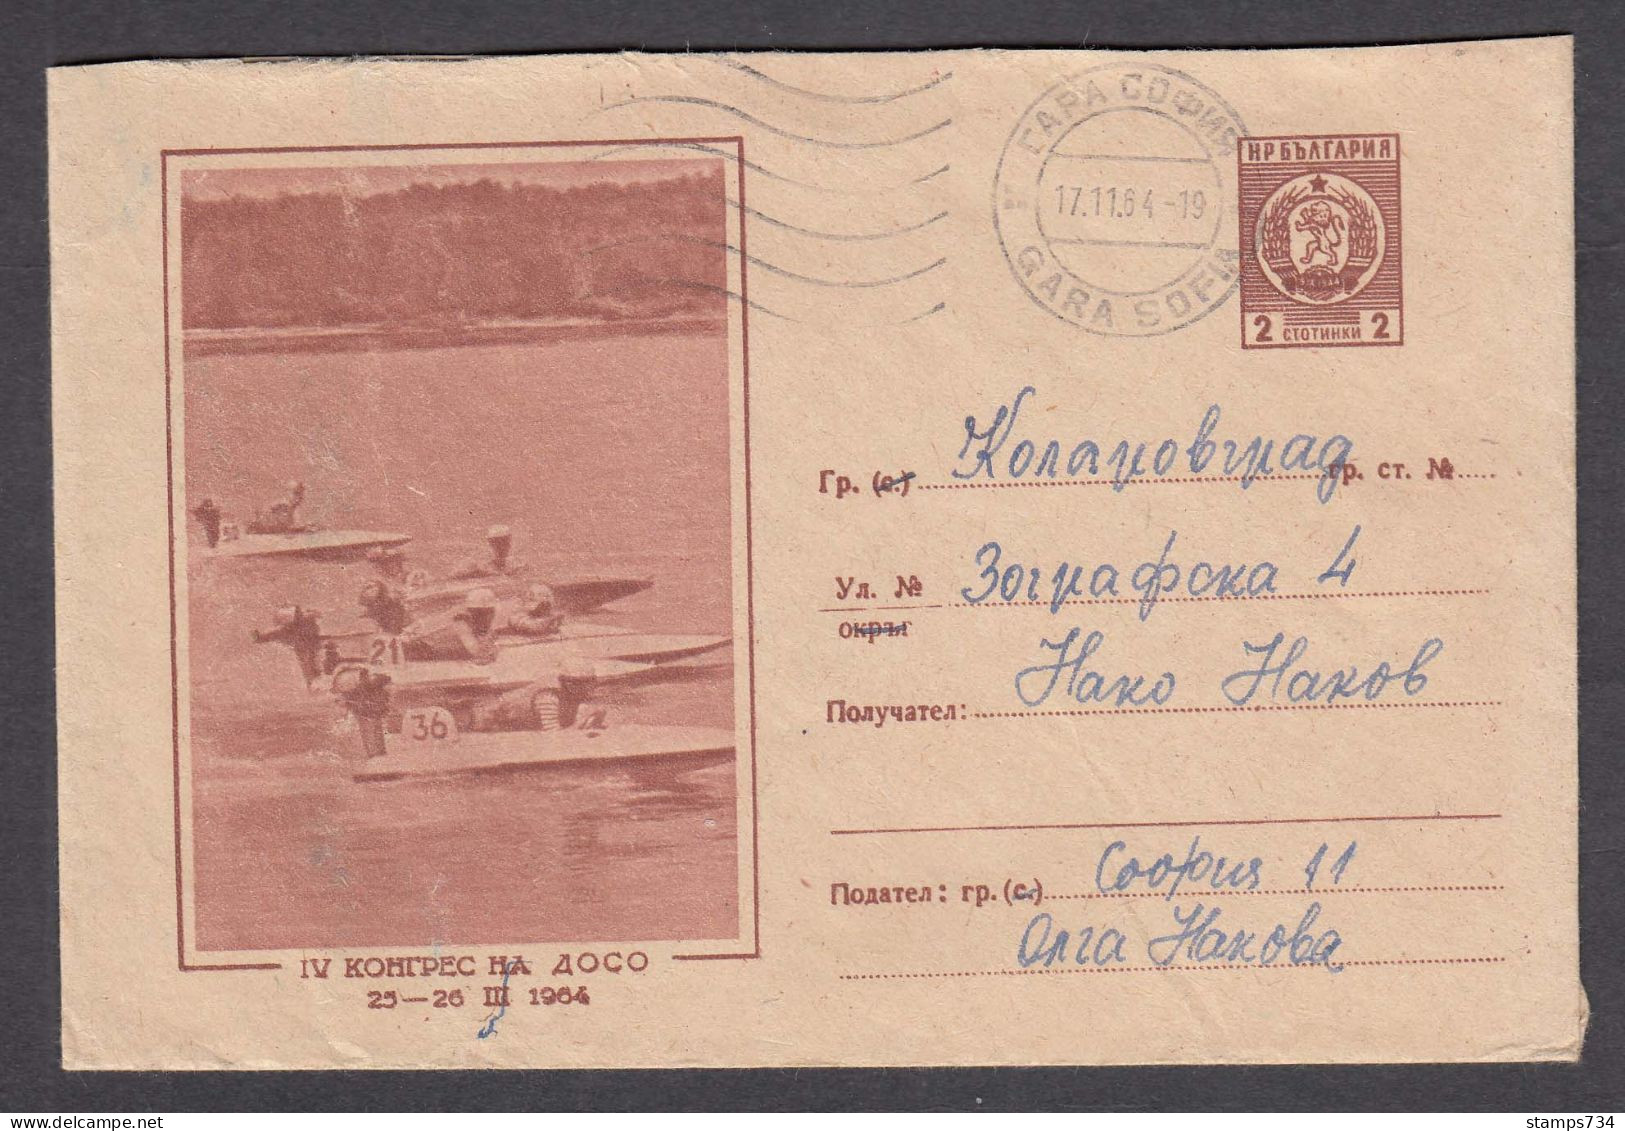 PS 086/1964, 4th DOSO Congress - Scooter Race , Post. Stationery - Bulgaria - Enveloppes